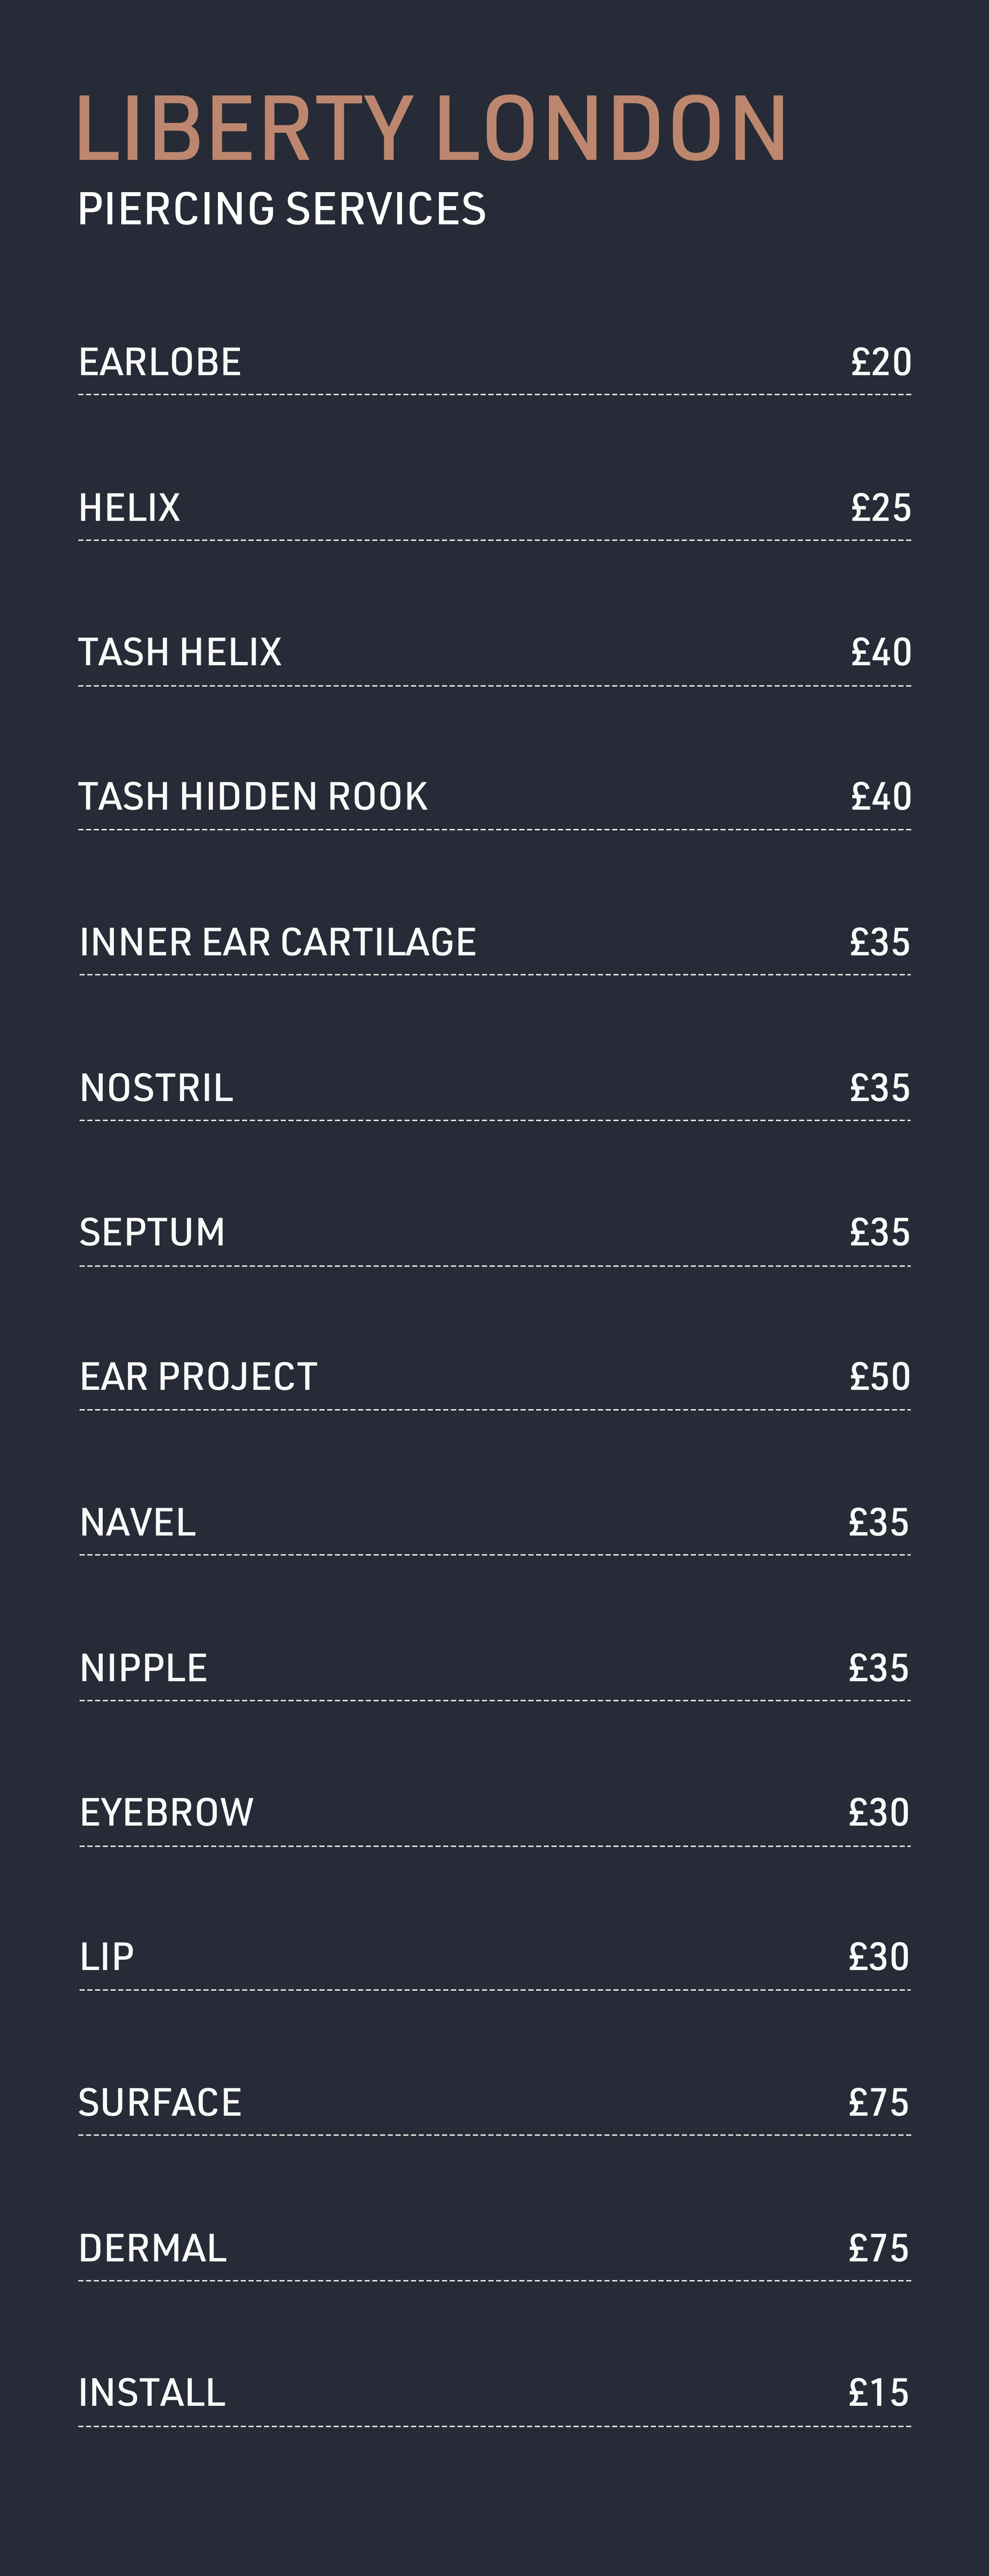 London Piercing prices for earlobe, helix, body, nostril, nipple, cartilage piercings